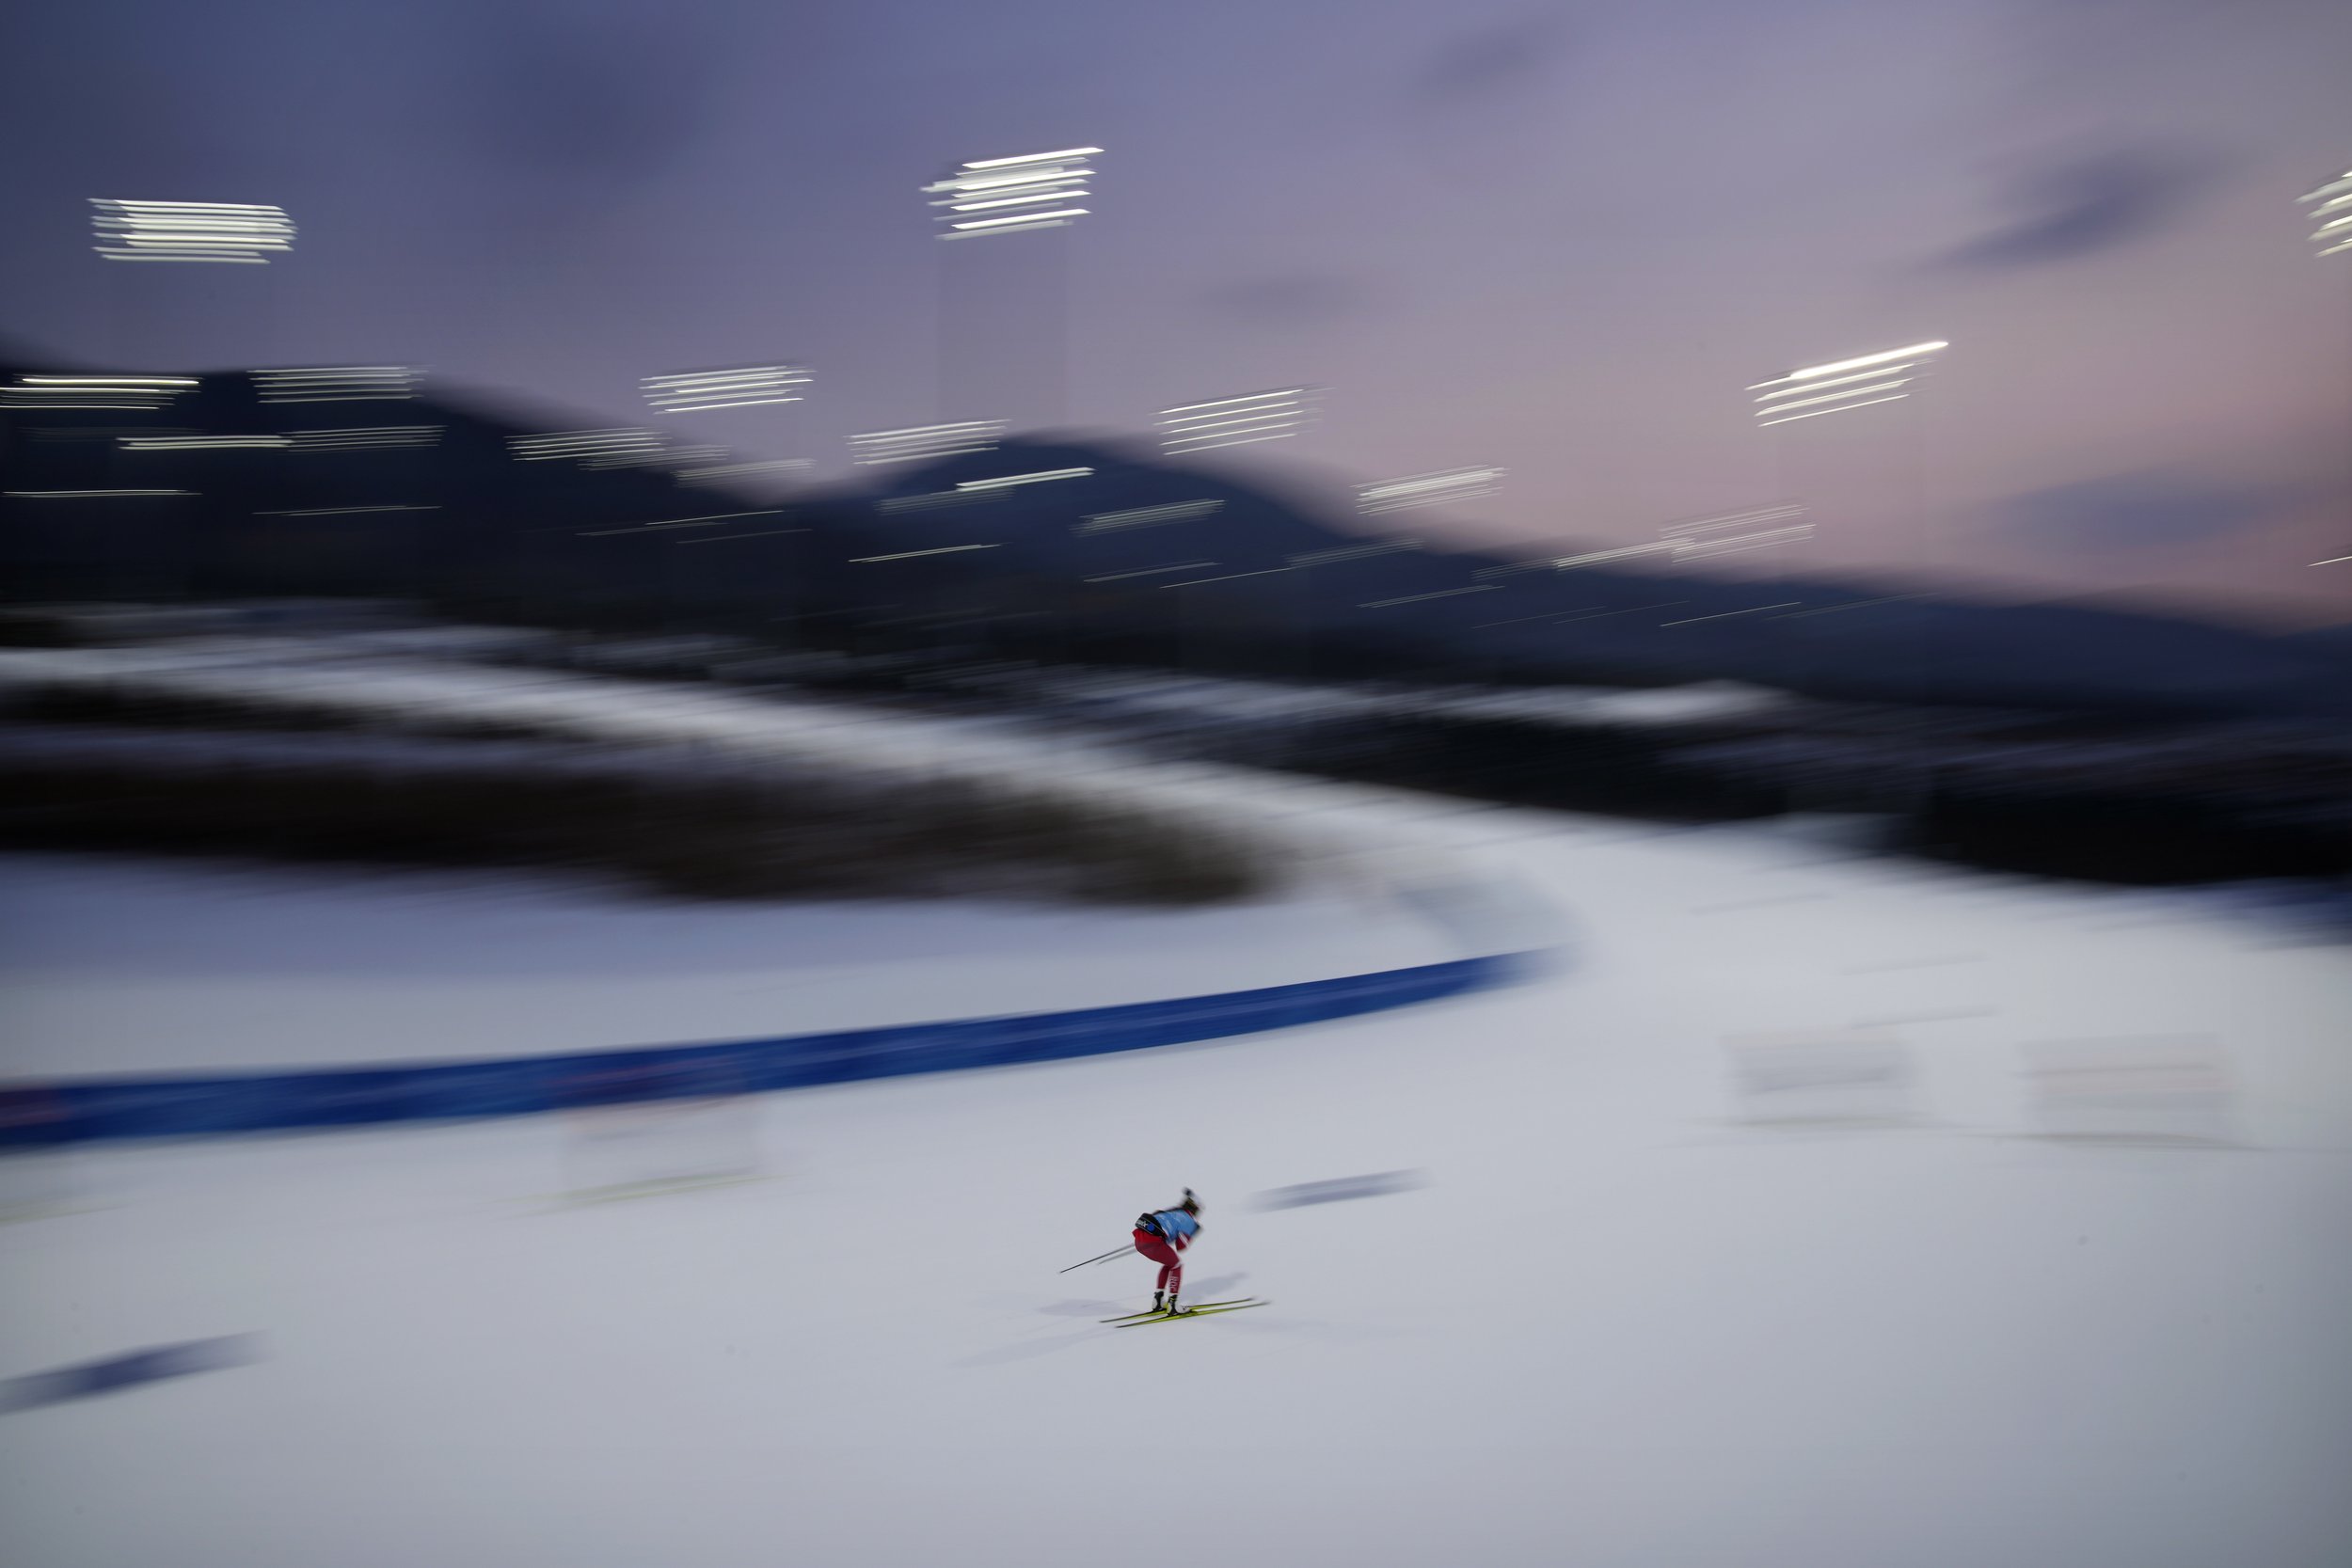  A Russian athlete trains during cross-country skiing training at the 2022 Winter Olympics, Wednesday, Feb. 9, 2022, in Zhangjiakou, China. (AP Photo/John Locher) 